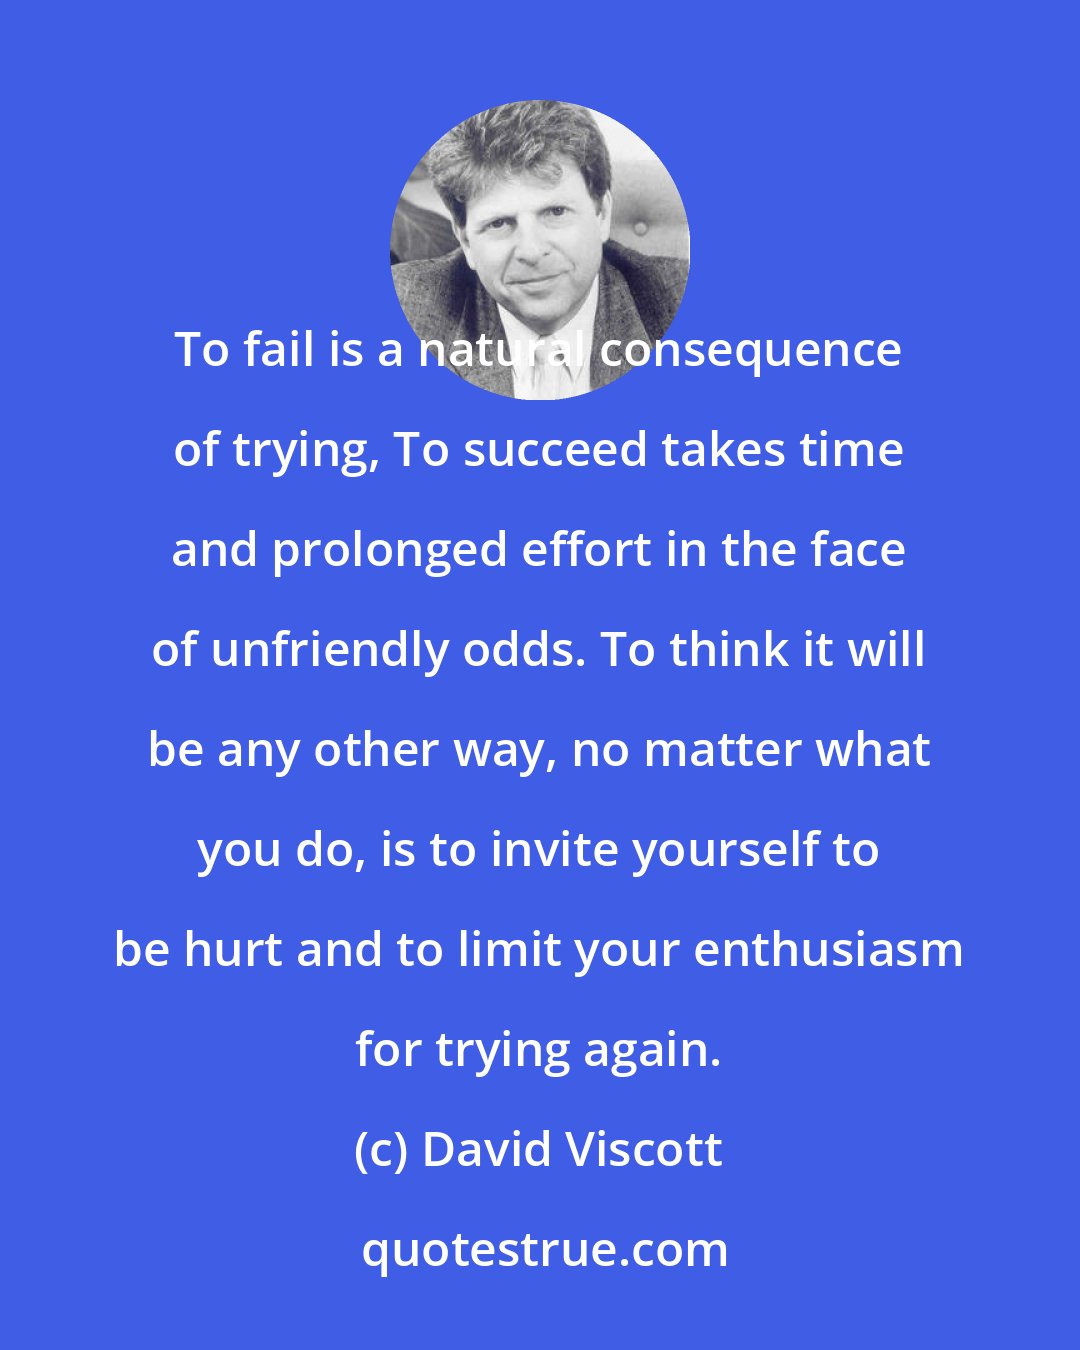 David Viscott: To fail is a natural consequence of trying, To succeed takes time and prolonged effort in the face of unfriendly odds. To think it will be any other way, no matter what you do, is to invite yourself to be hurt and to limit your enthusiasm for trying again.